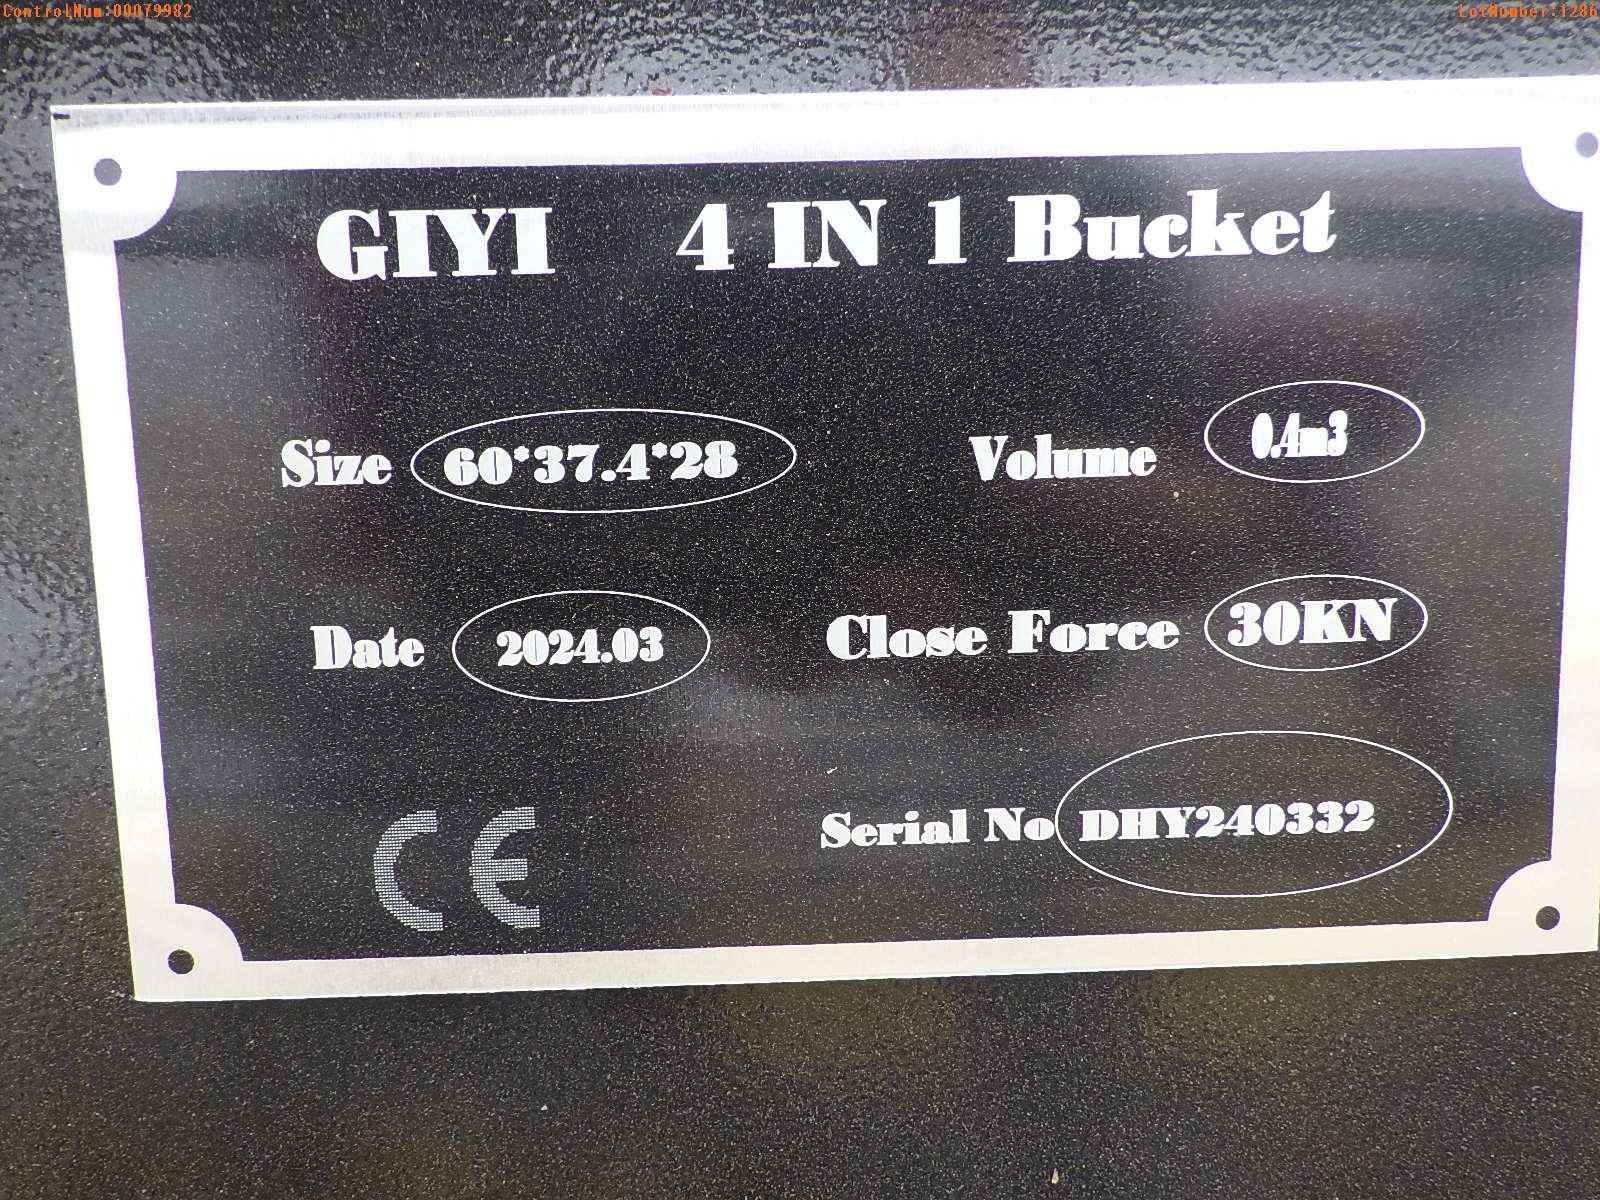 5-01286 (Equip.-Implement misc.)  Seller:Private/Dealer GIYI QUICK CONNECT 4 IN